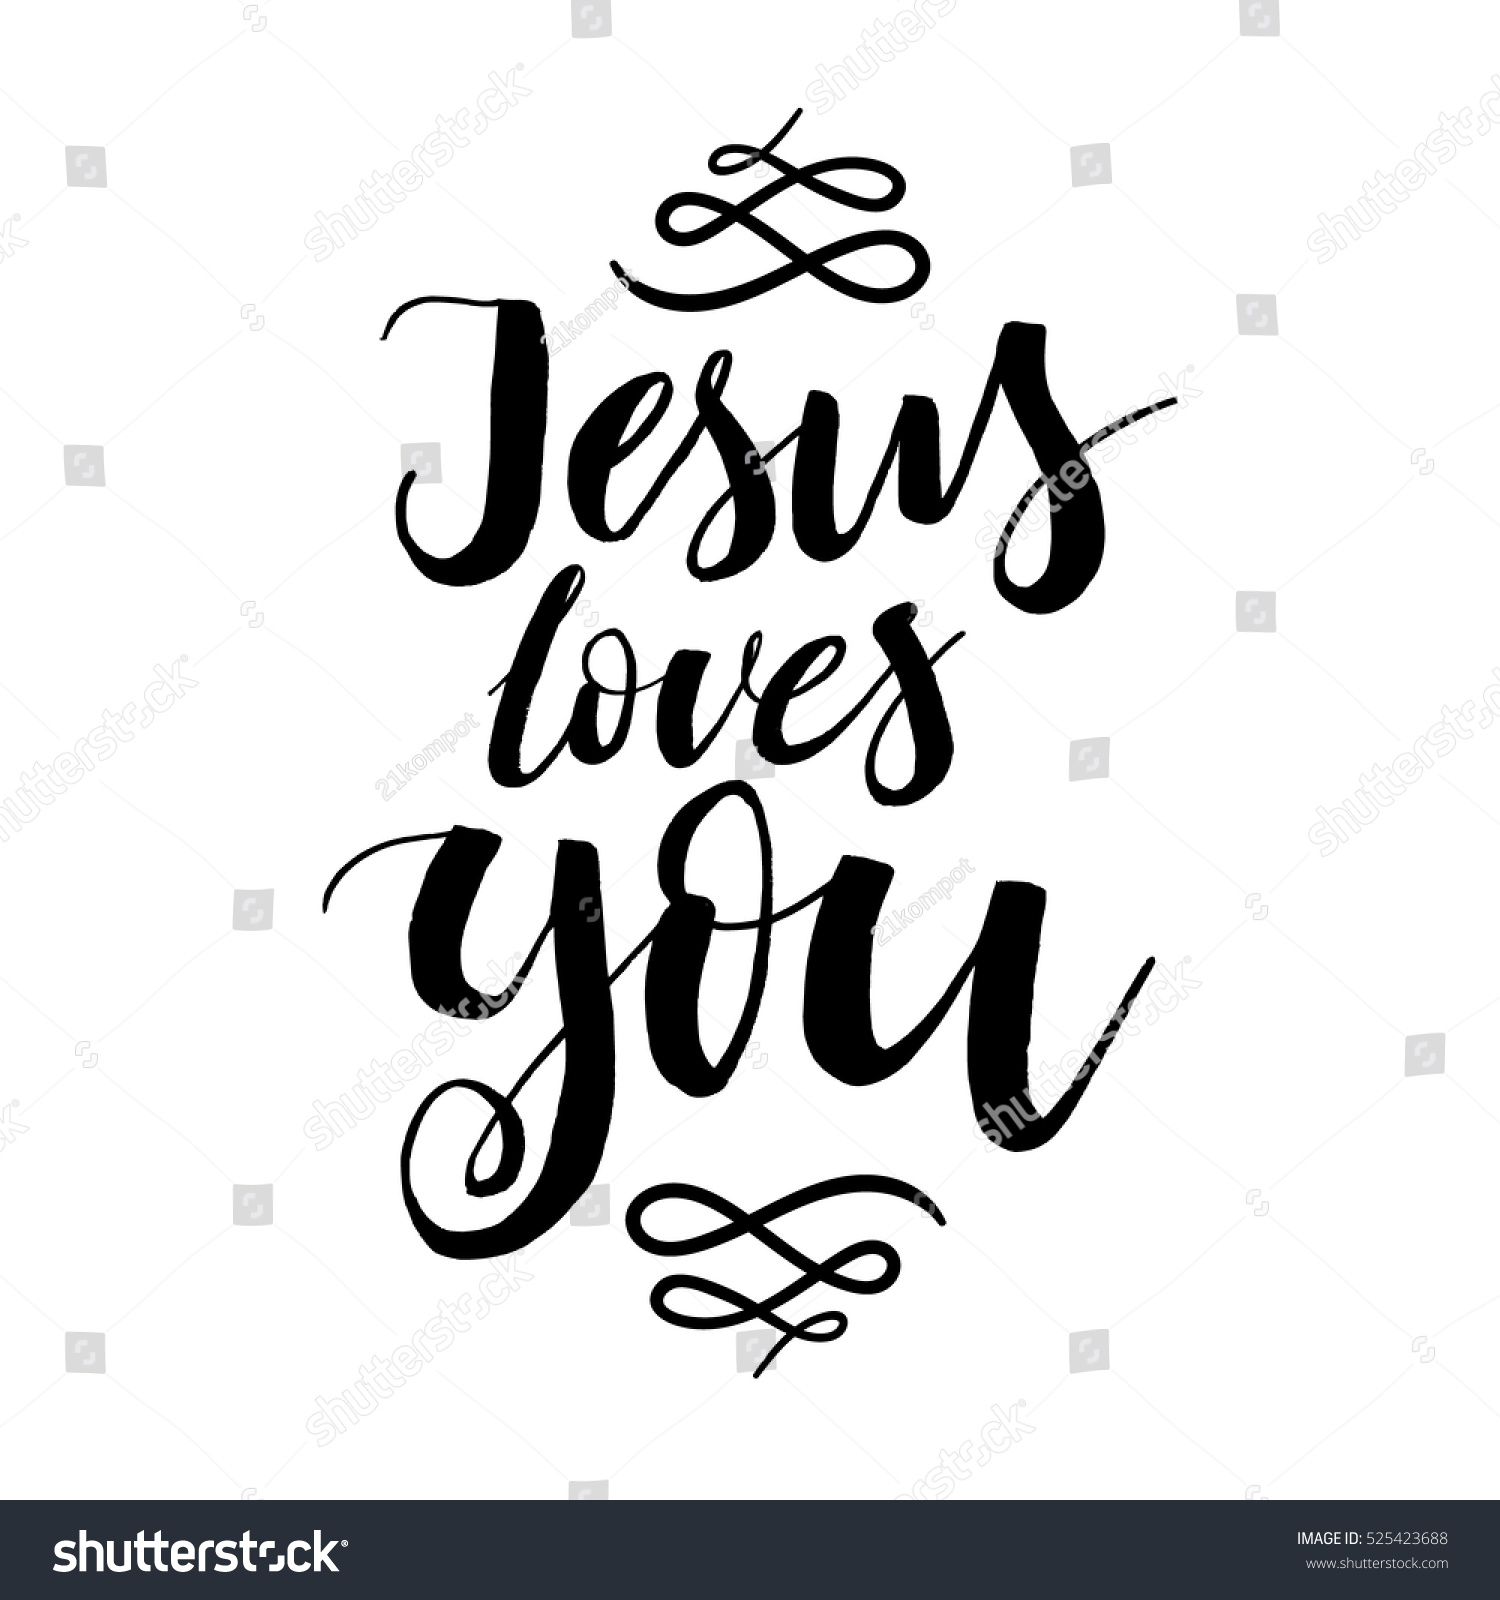 Jesus Loves You Vector Inspirational quote Design element for housewarming poster t